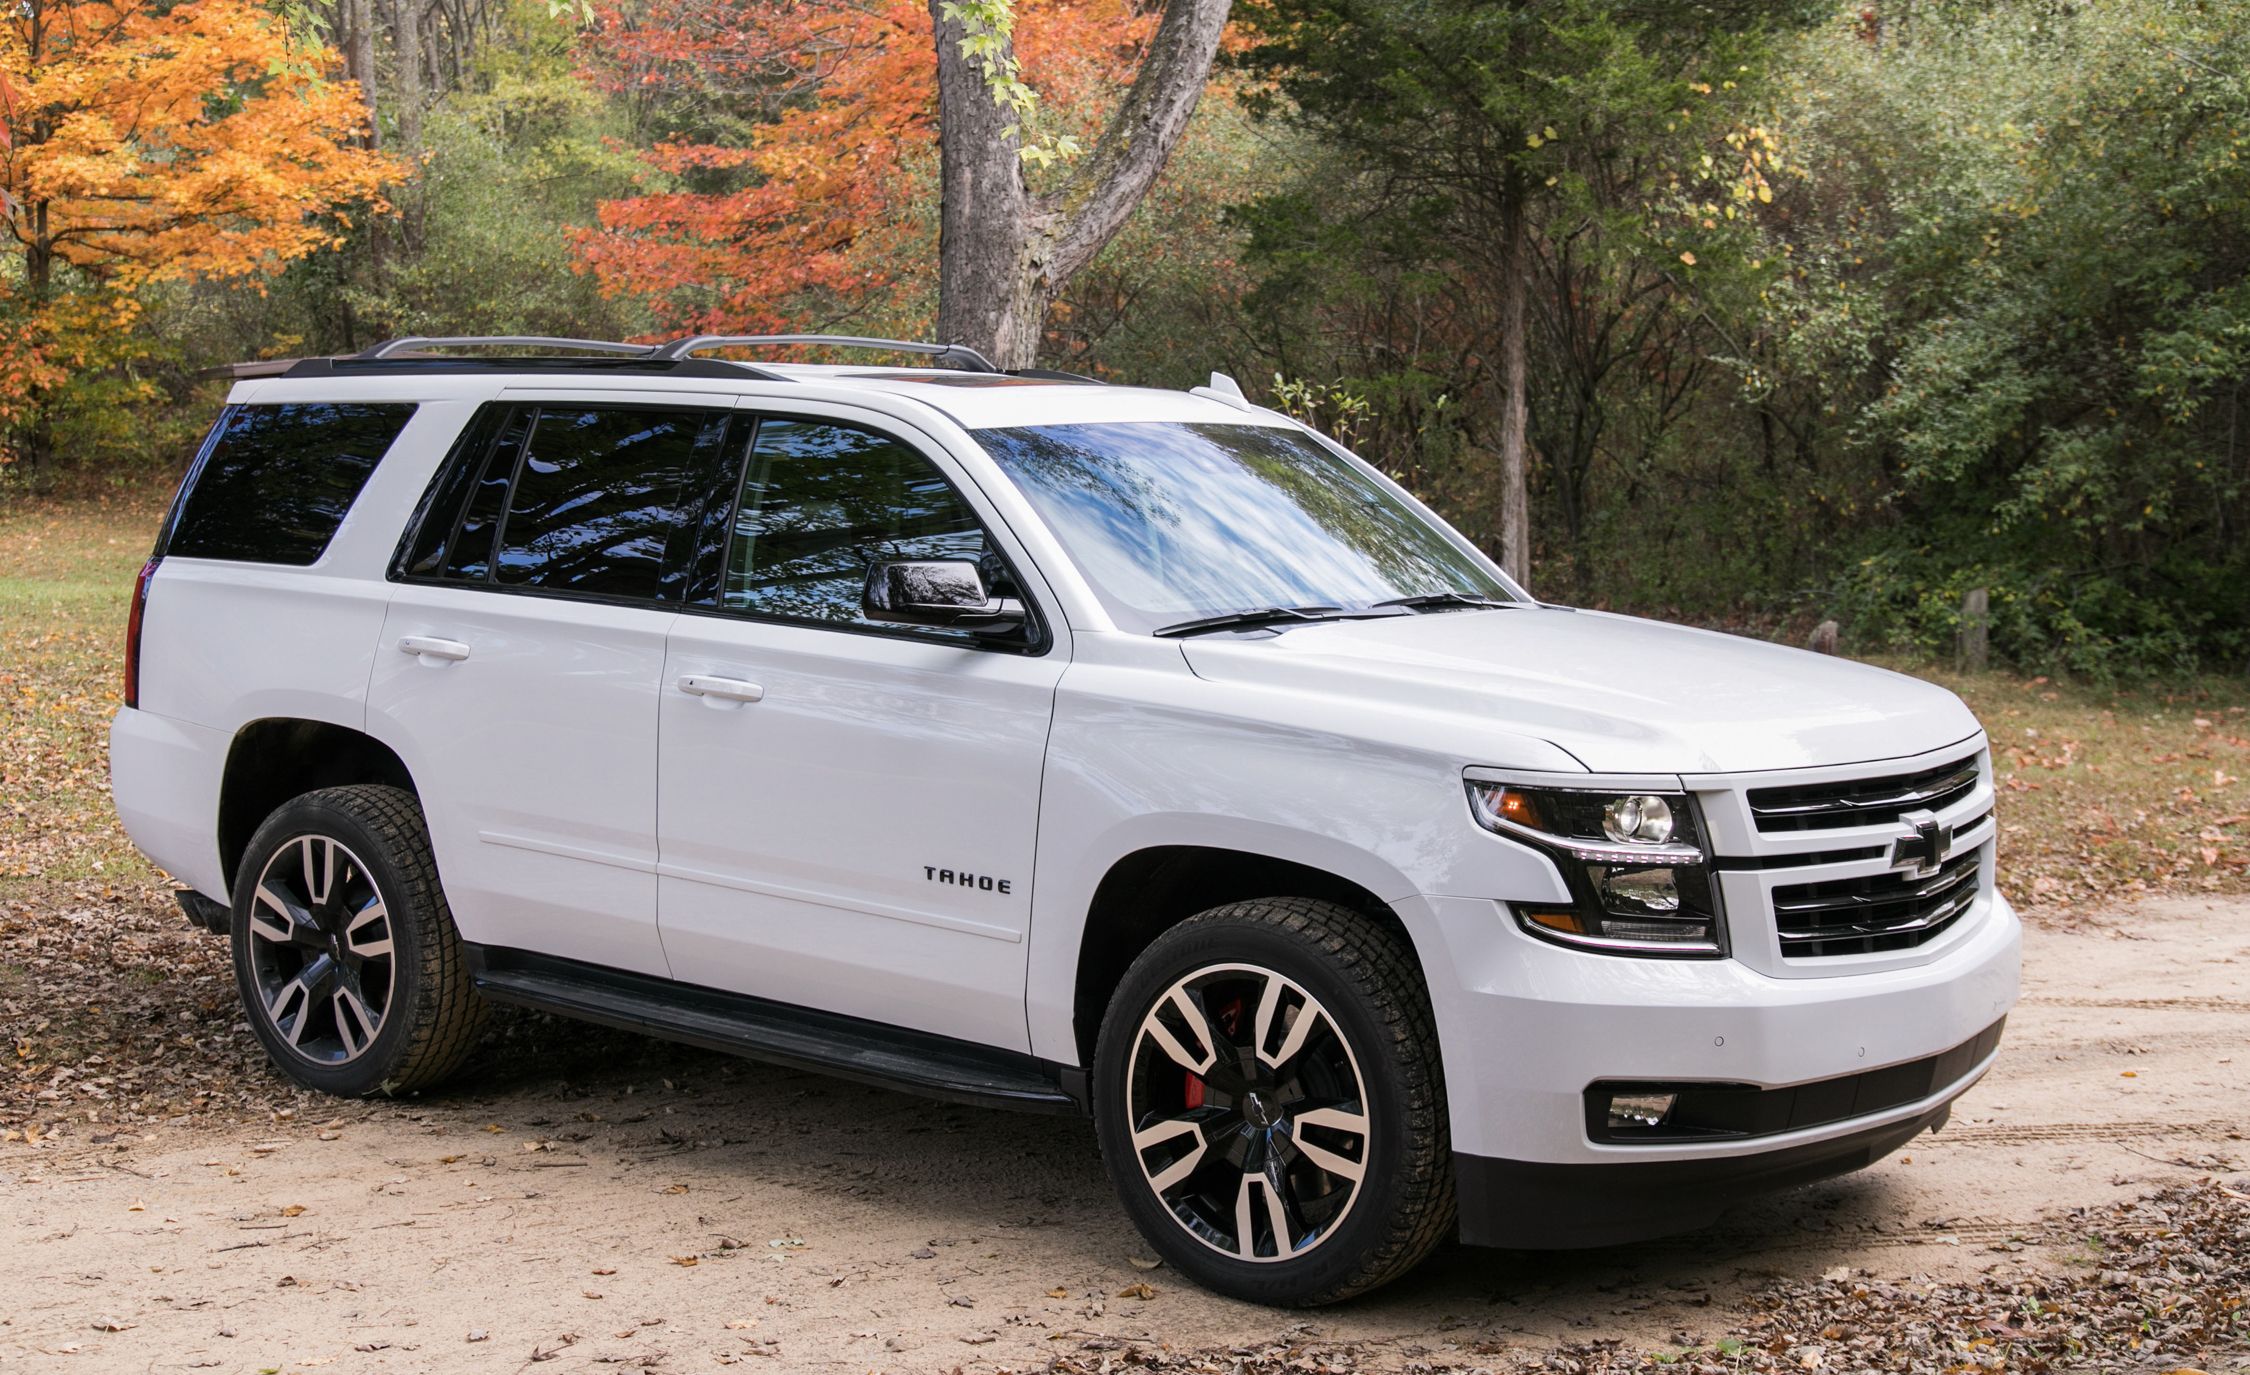 2018 Chevrolet Tahoe Performance and Driving Impressions Review Car 